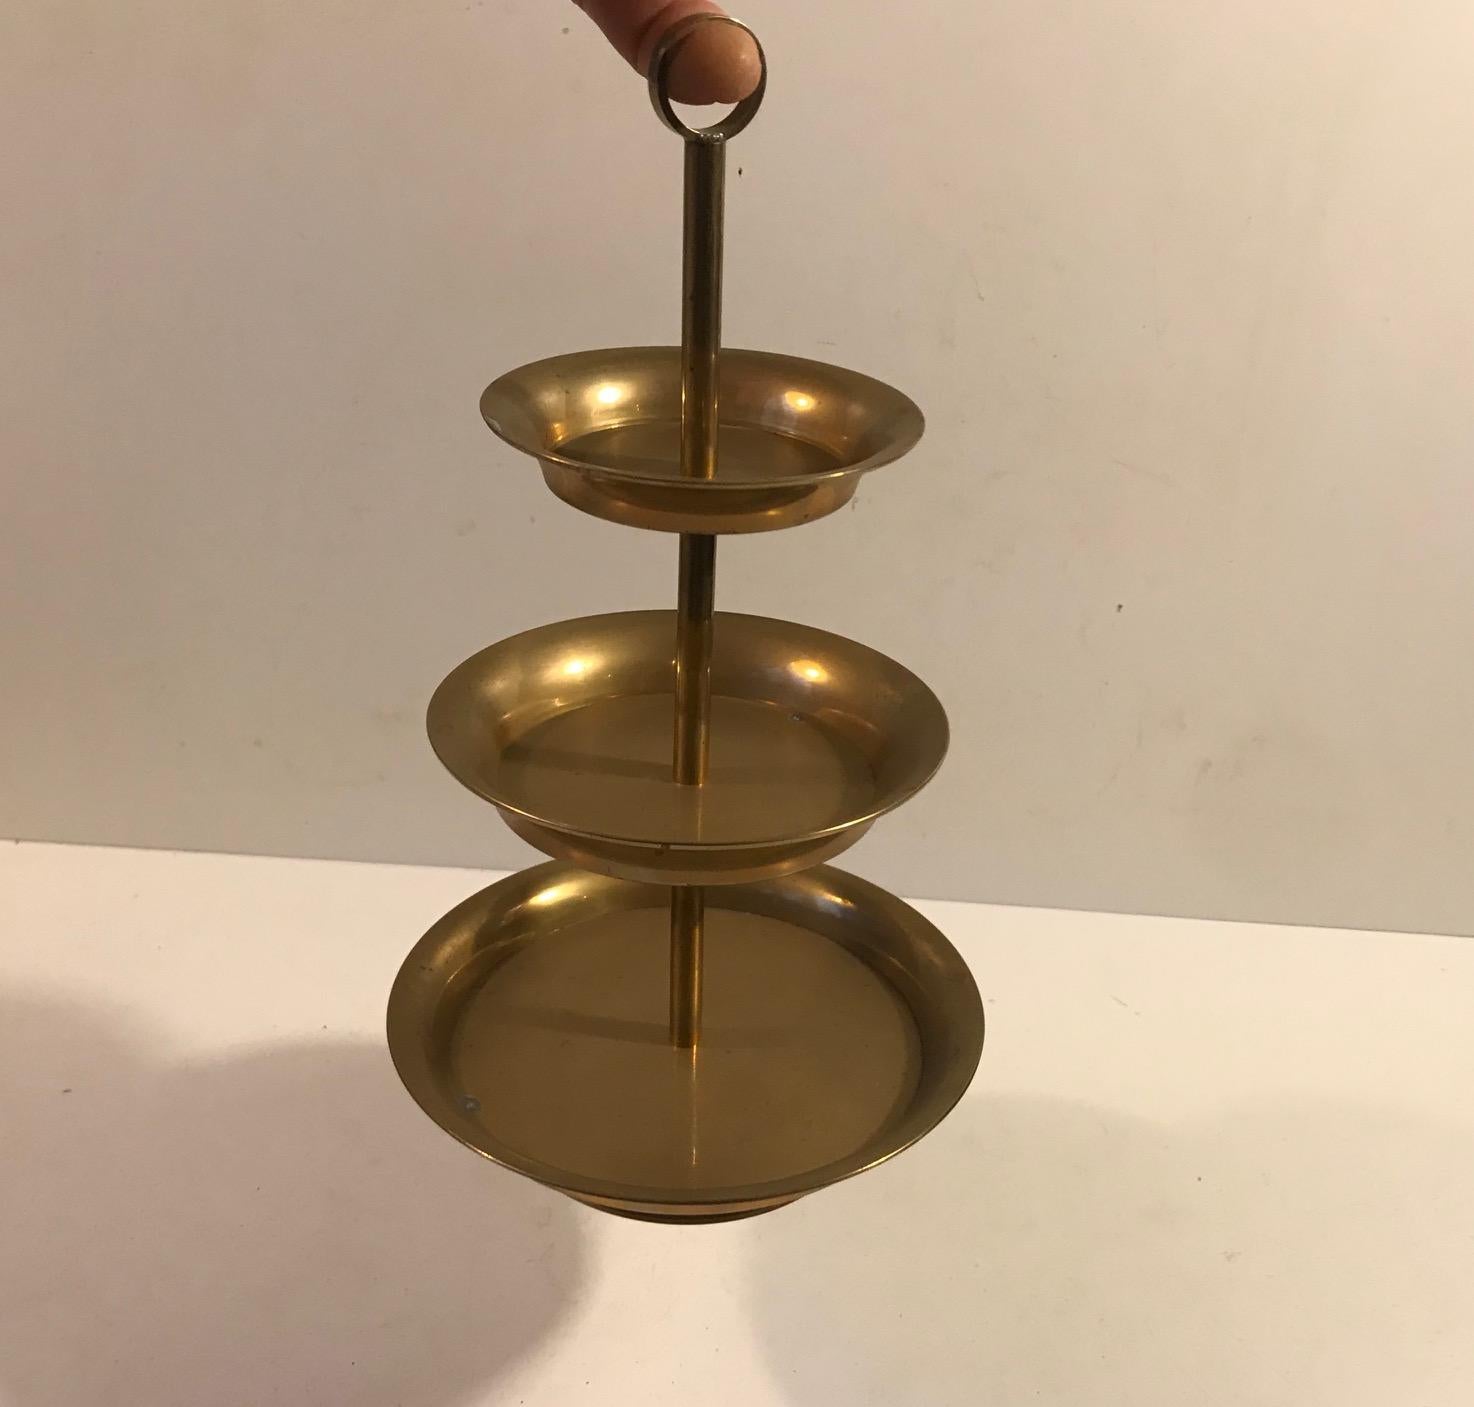 Charming cake stand with practical 'finger hole' handle. Its made entirely from solid brass. Unknown Scandinavian maker in the style of Svenskt Tenn, circa 1970.